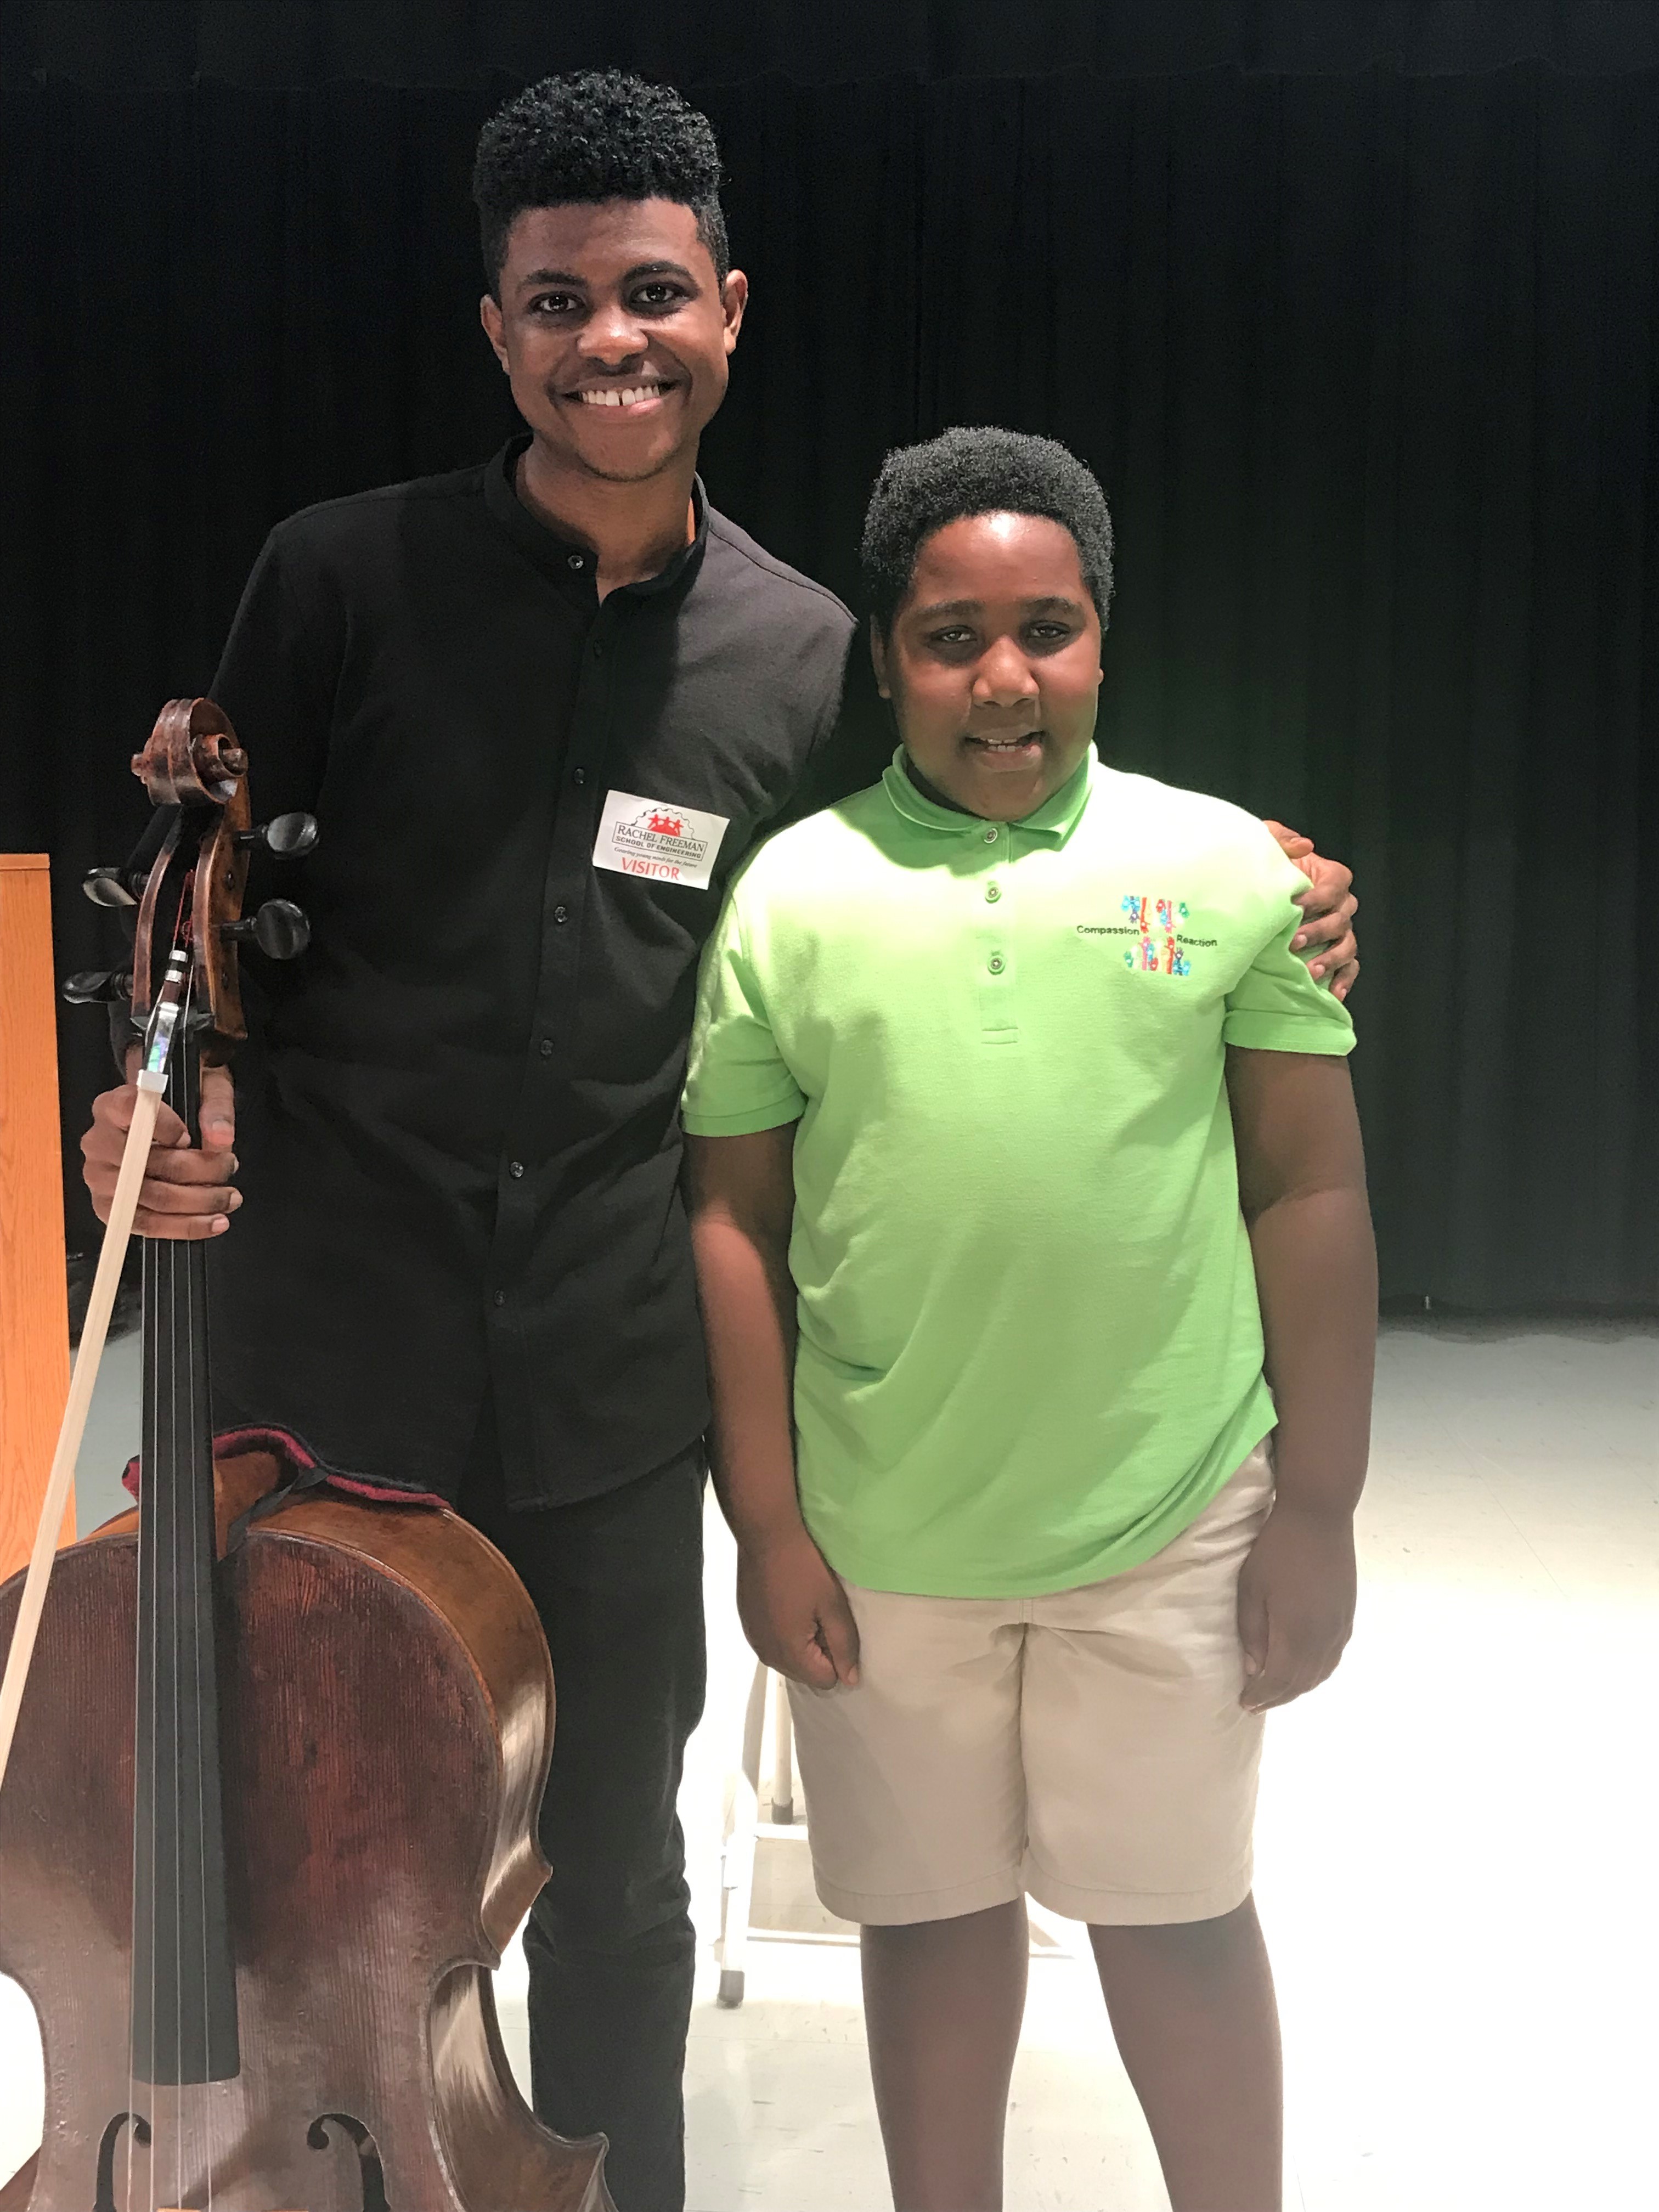 Cellist Sterling Elliott with Snipes Academy student